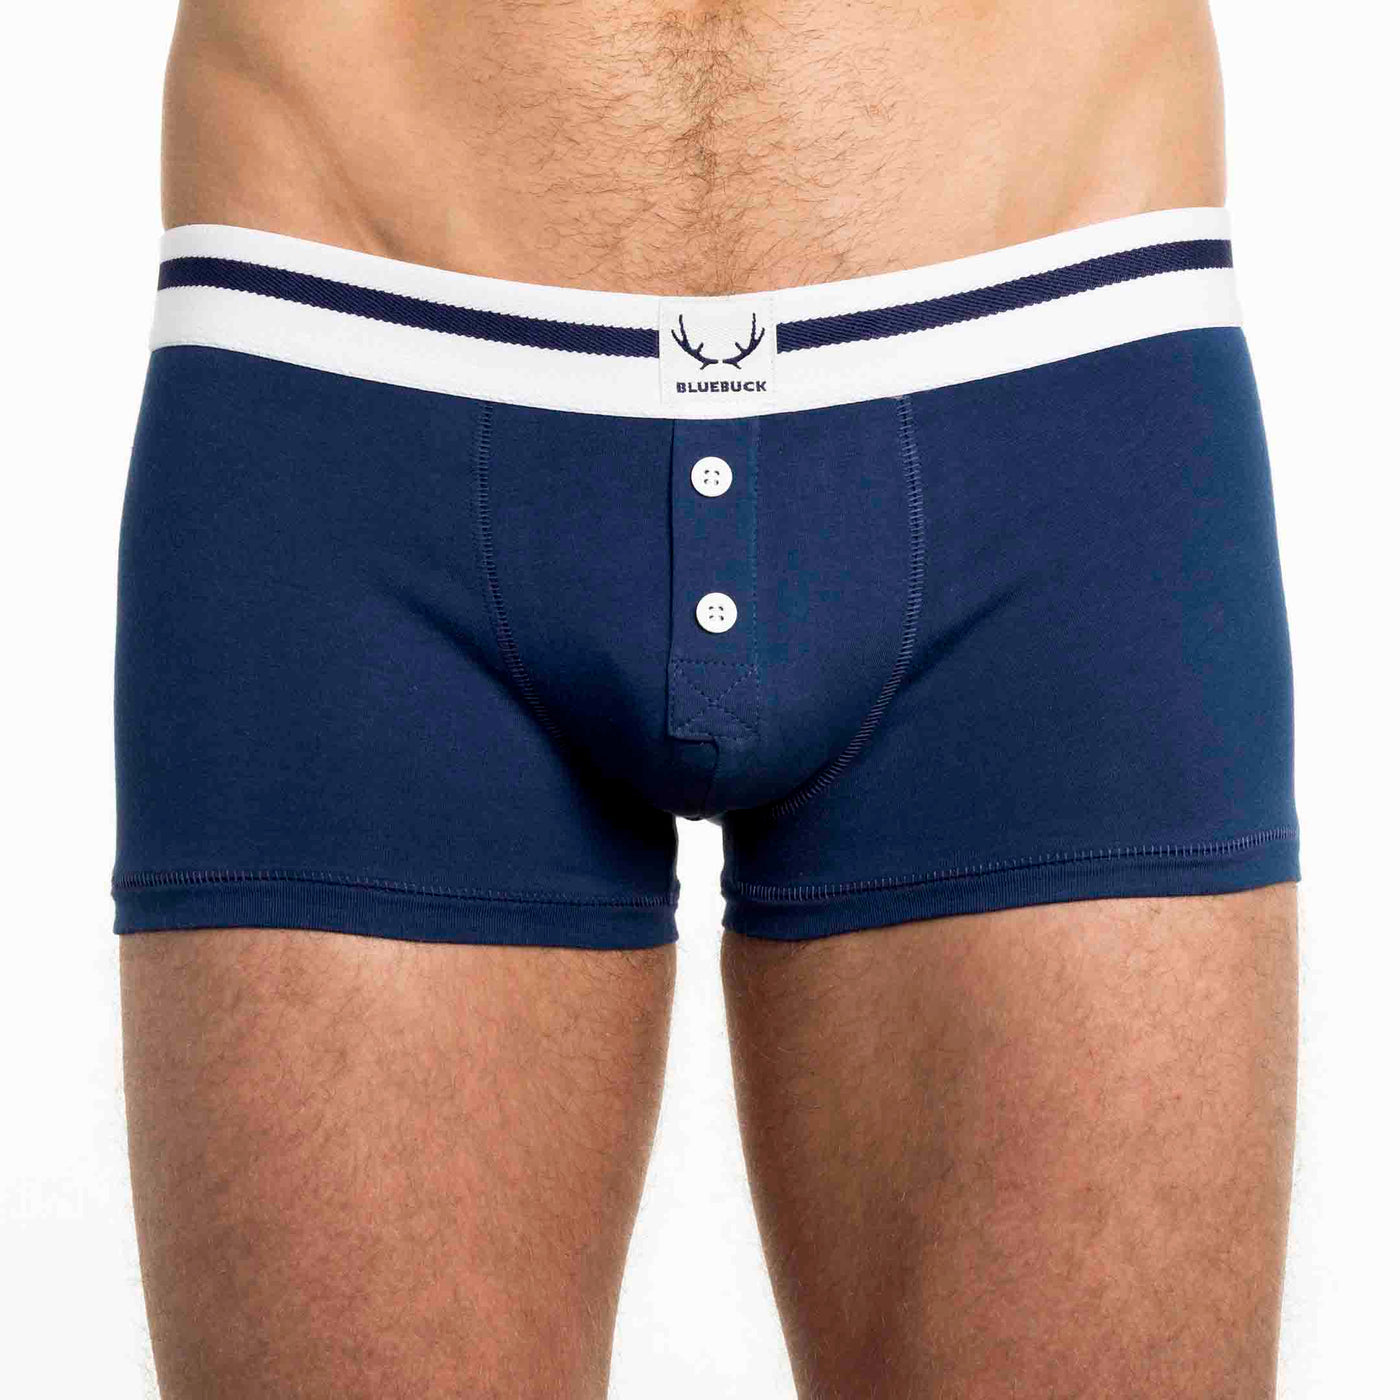 Navy blue trunk - white buttons